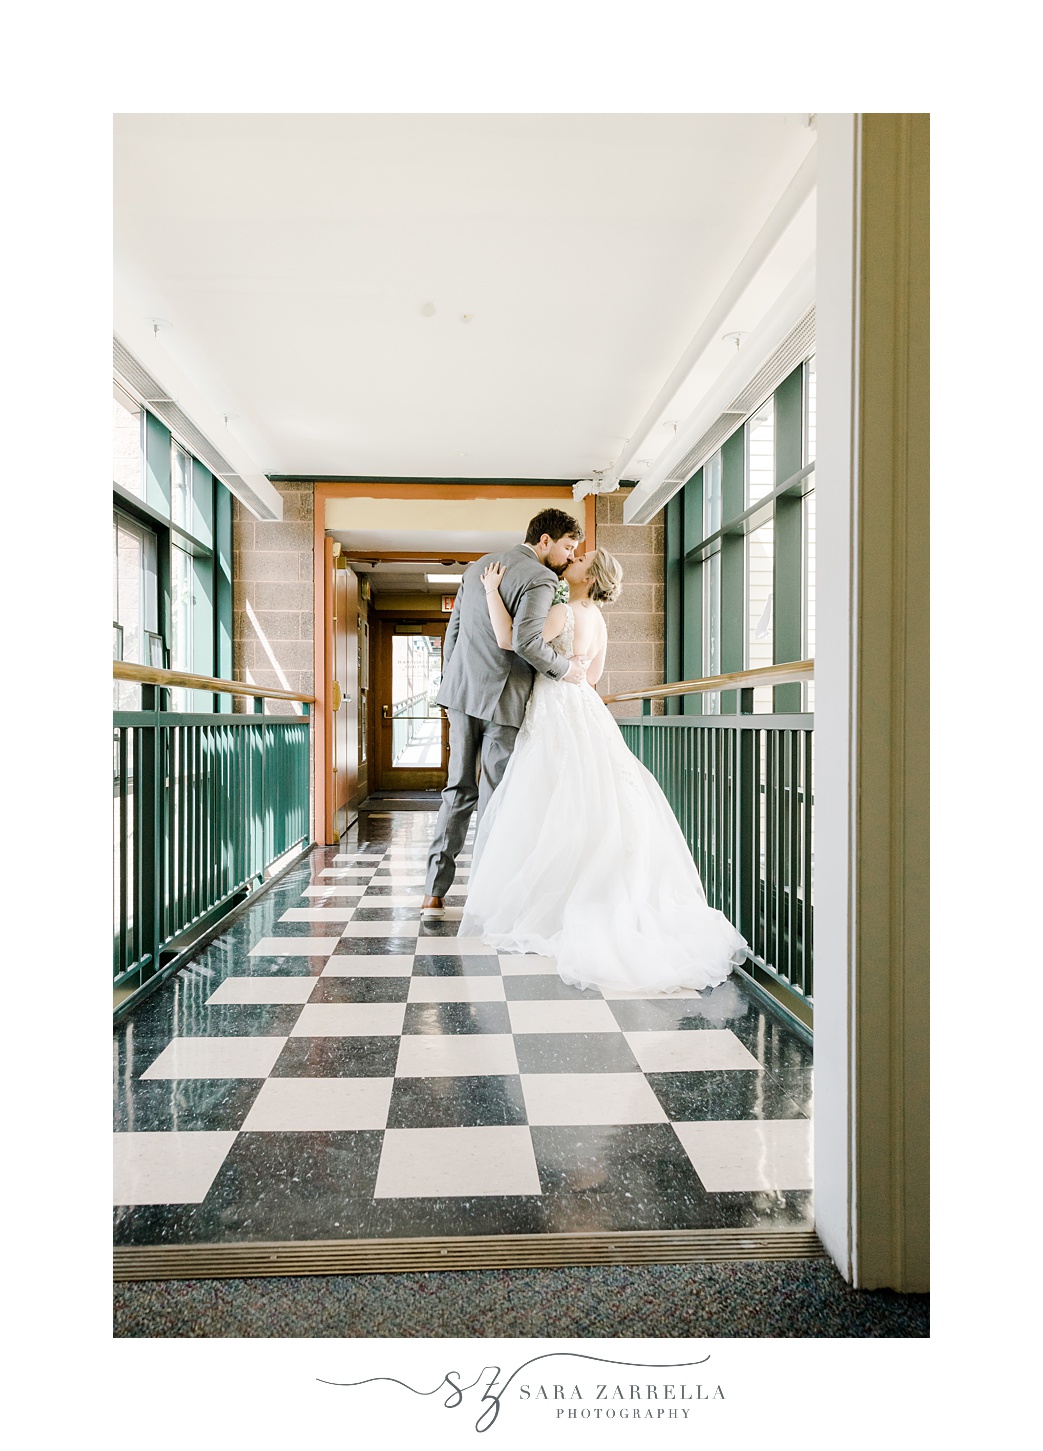 bride and groom kiss in hallway with black and white floors and green railings at East Greenwich Town Hall